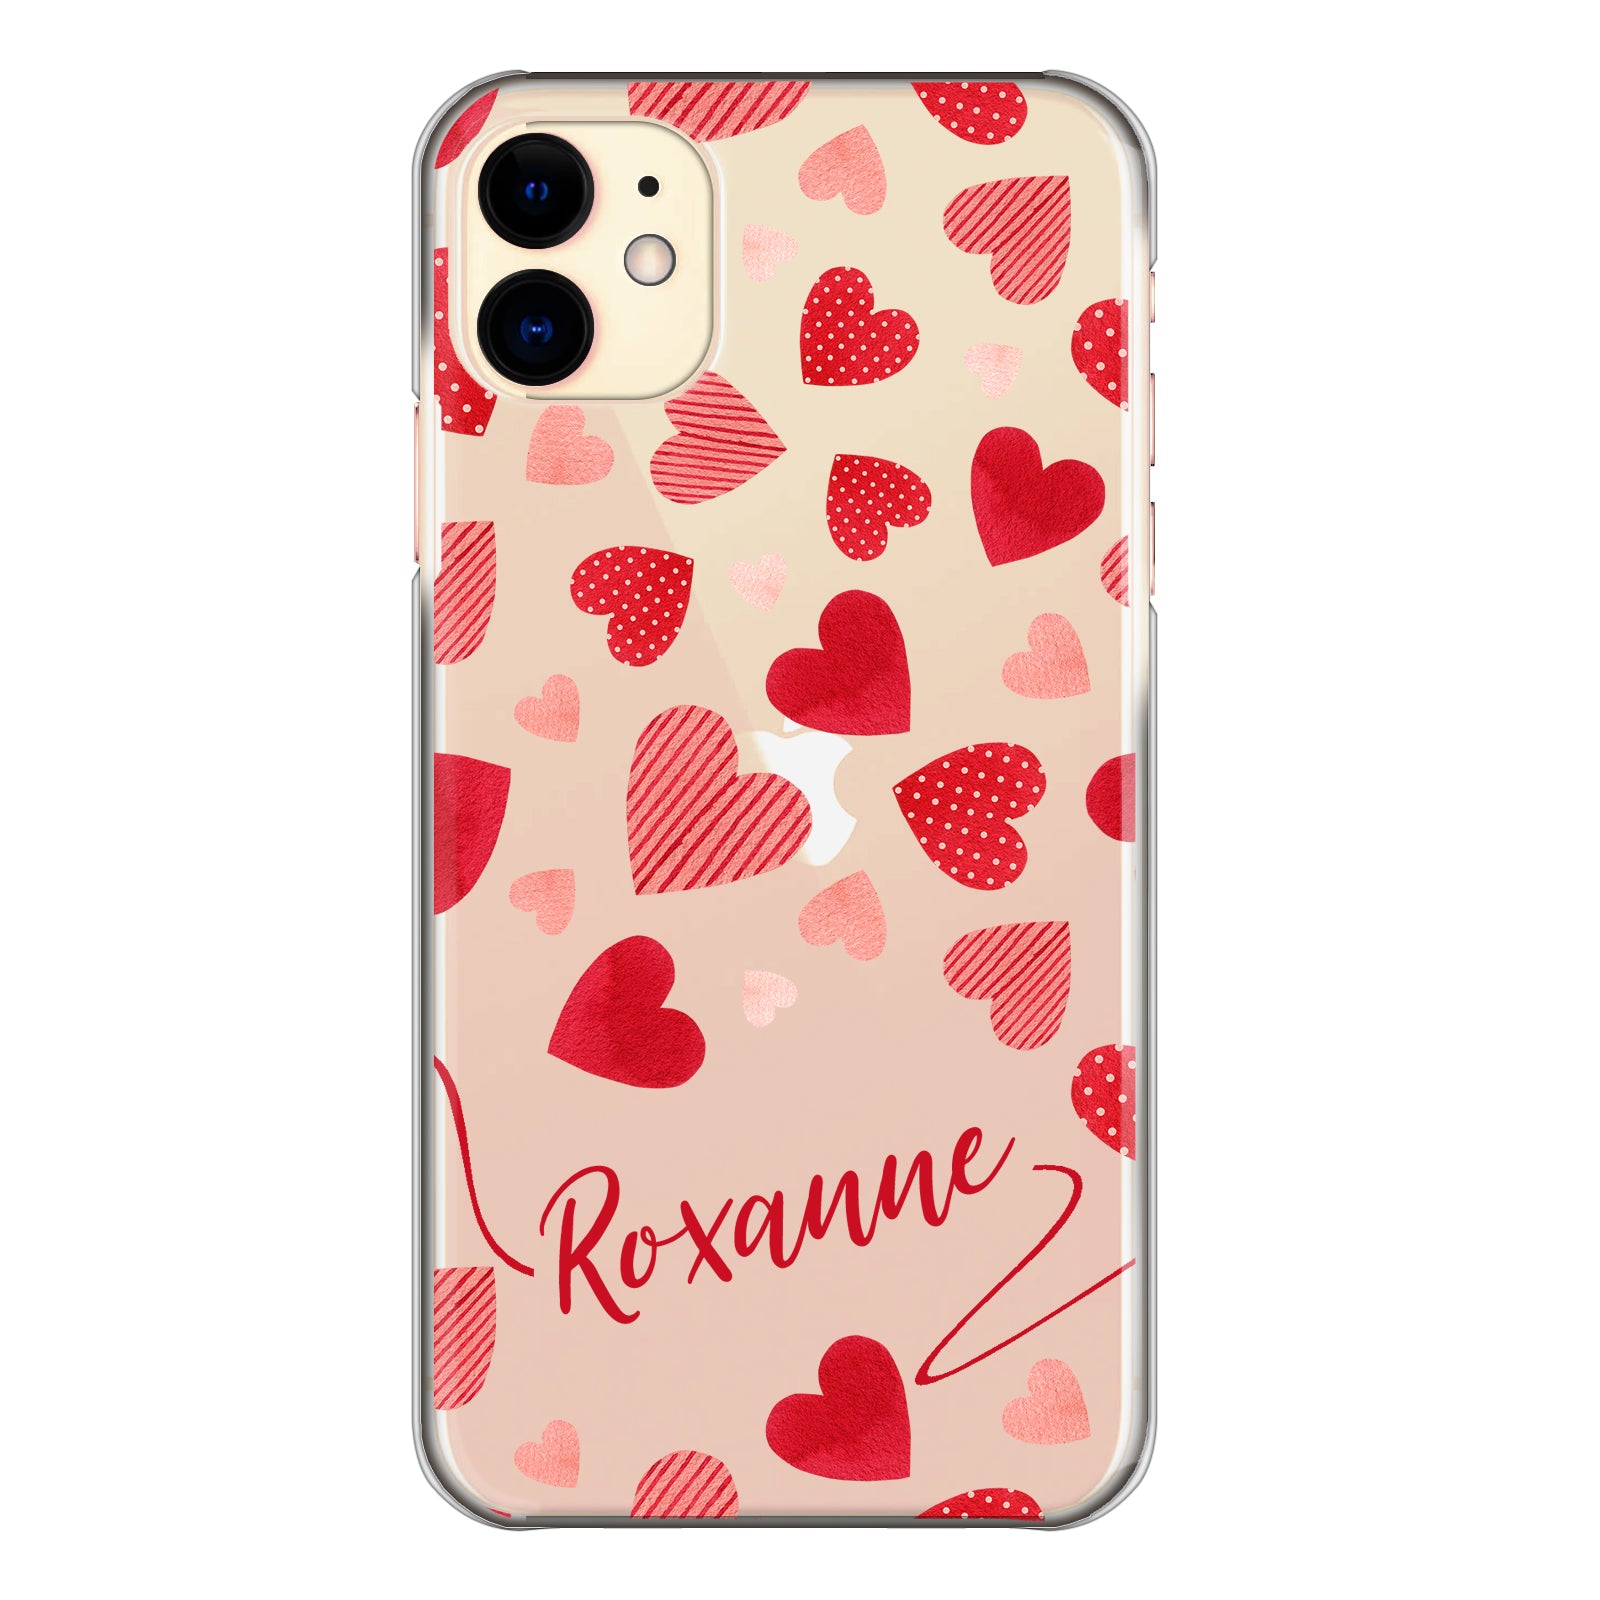 Personalised Nokia Phone Hard Case with Polka Dot/Striped Hearts and Stylish Text